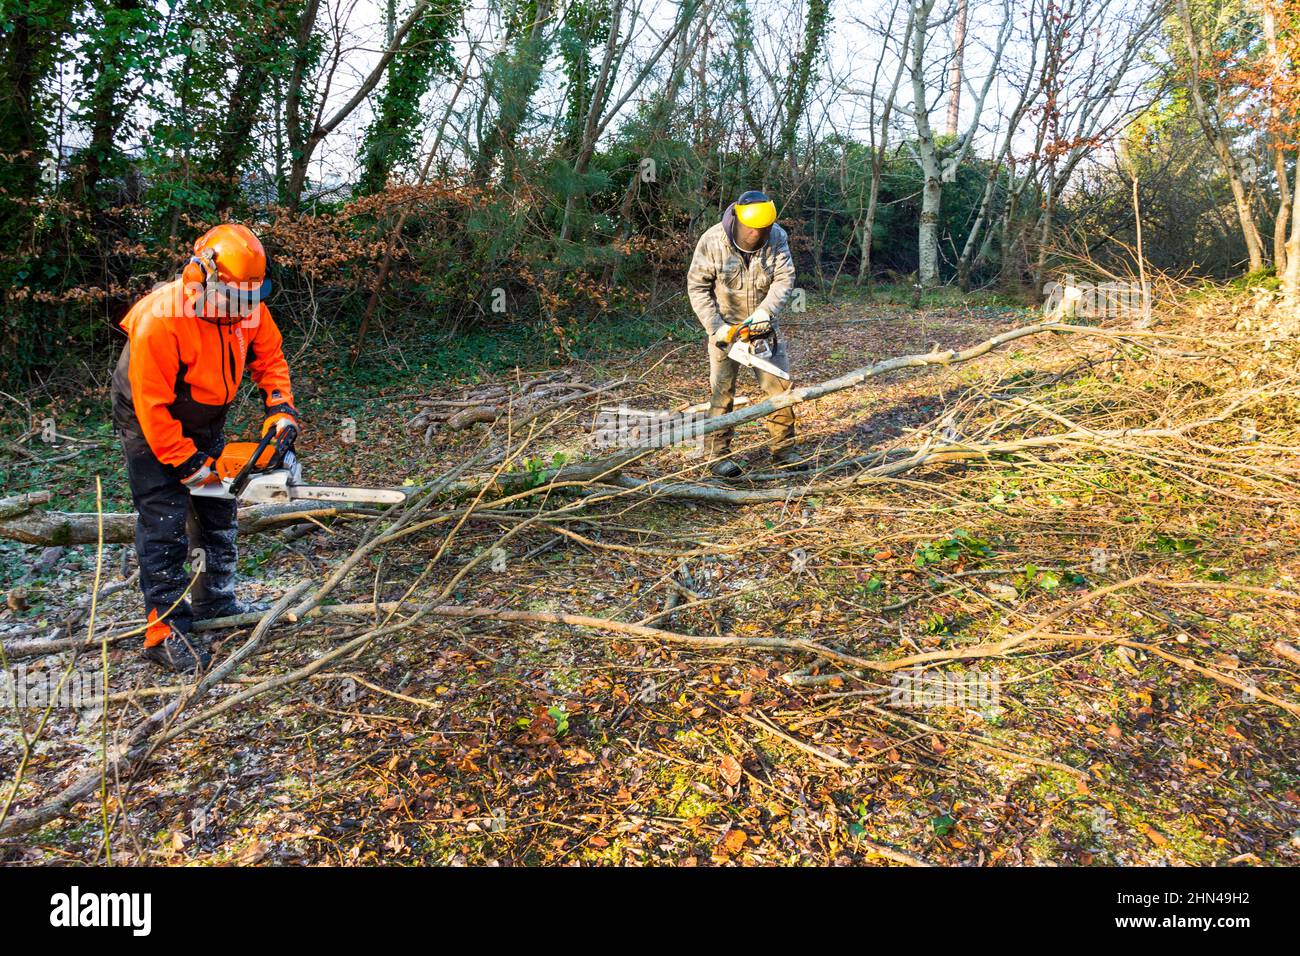 Men cutting tree with chainsaw for wood logs for heating in wood burning stove, County Donegal, Ireland Stock Photo